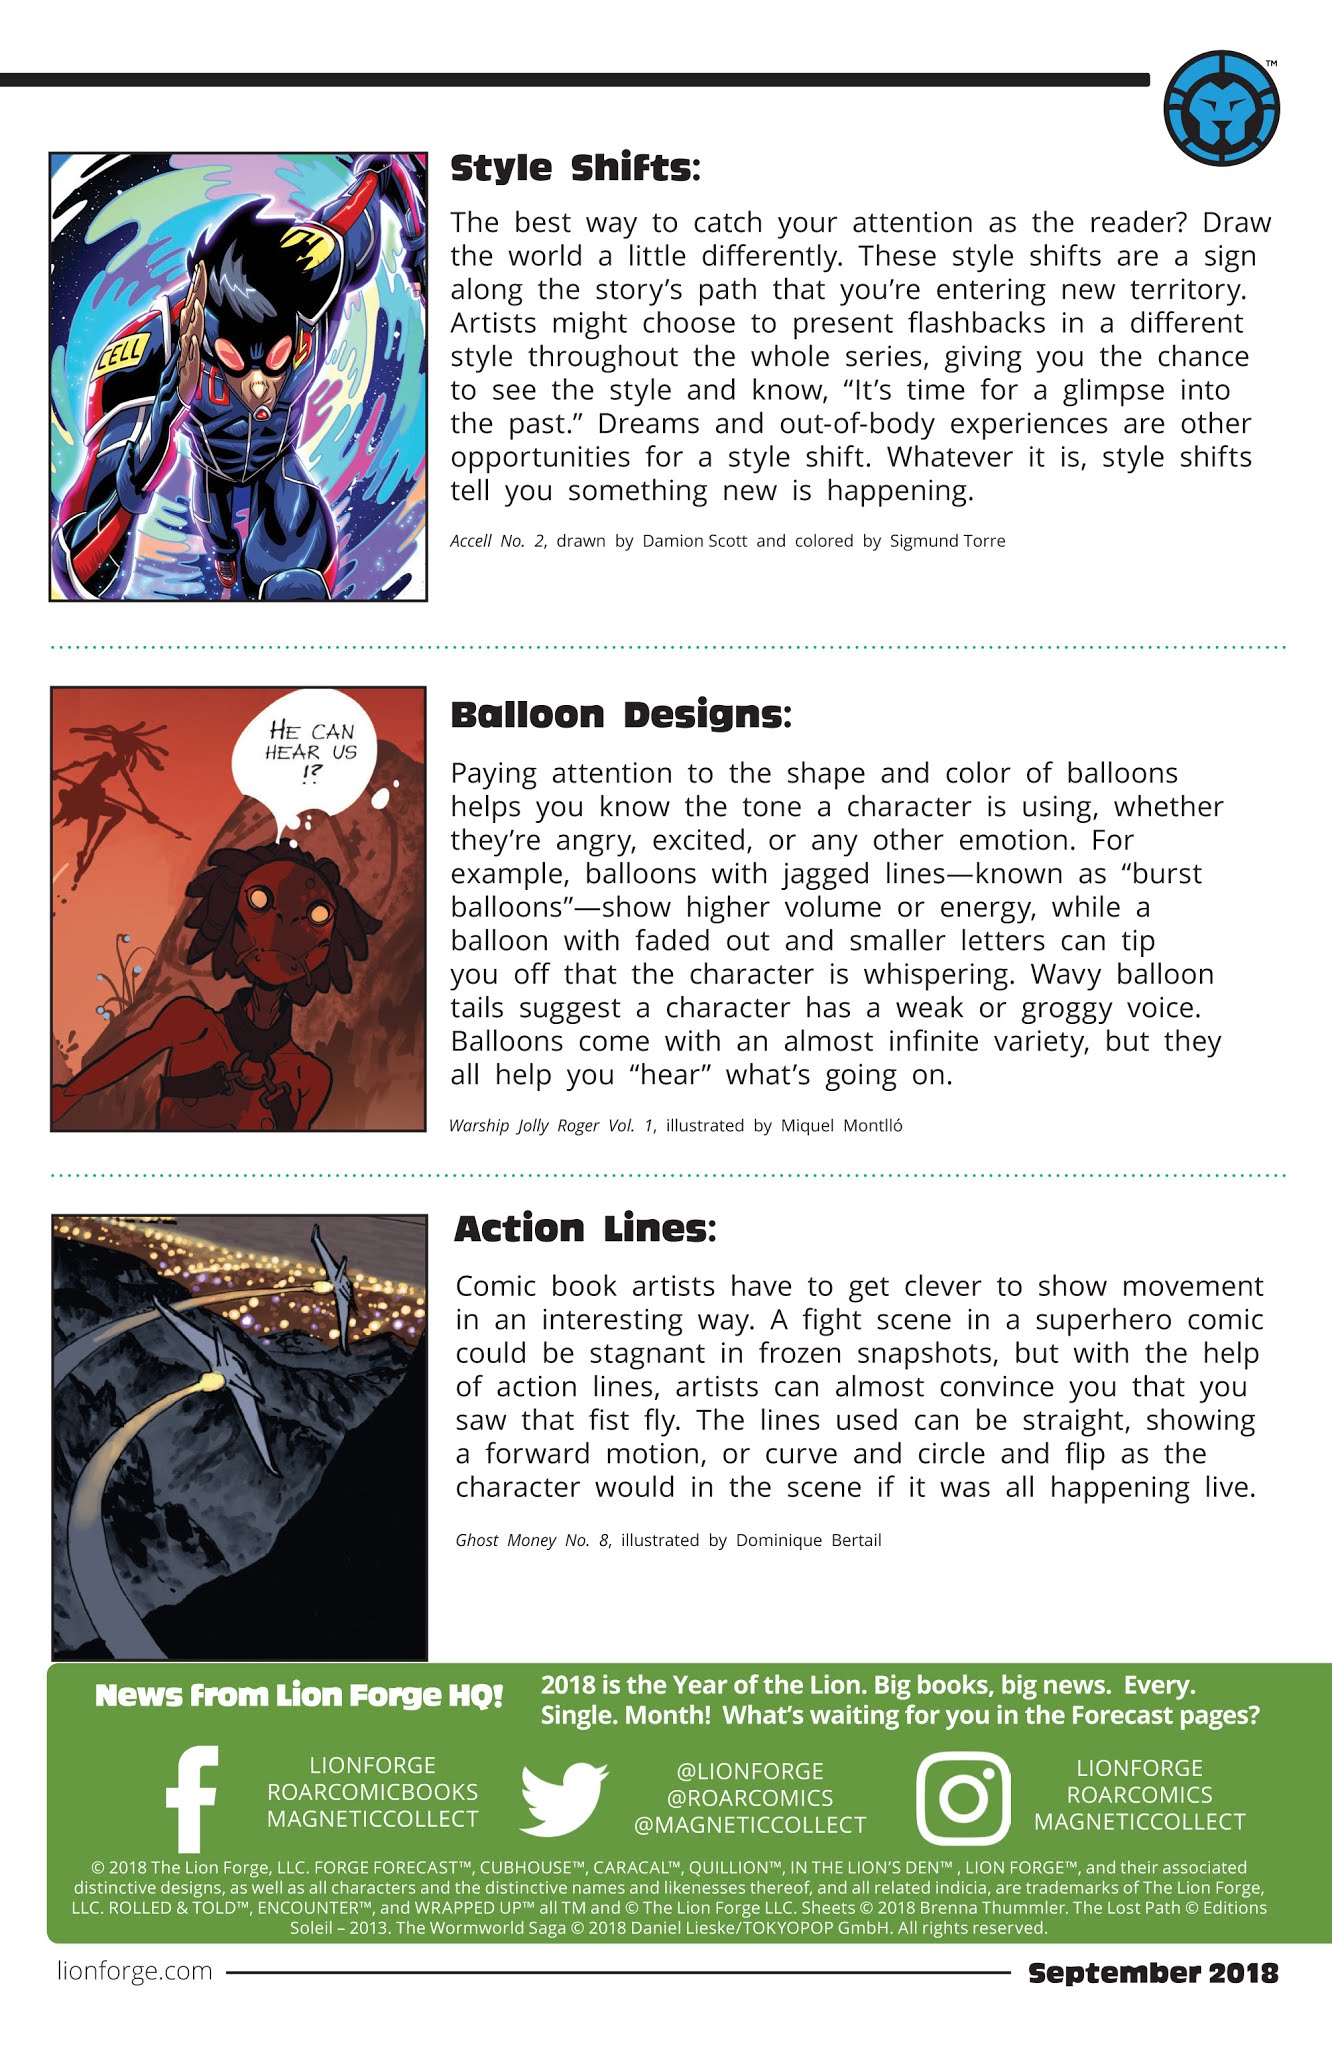 Read online Accell comic -  Issue #14 - 29